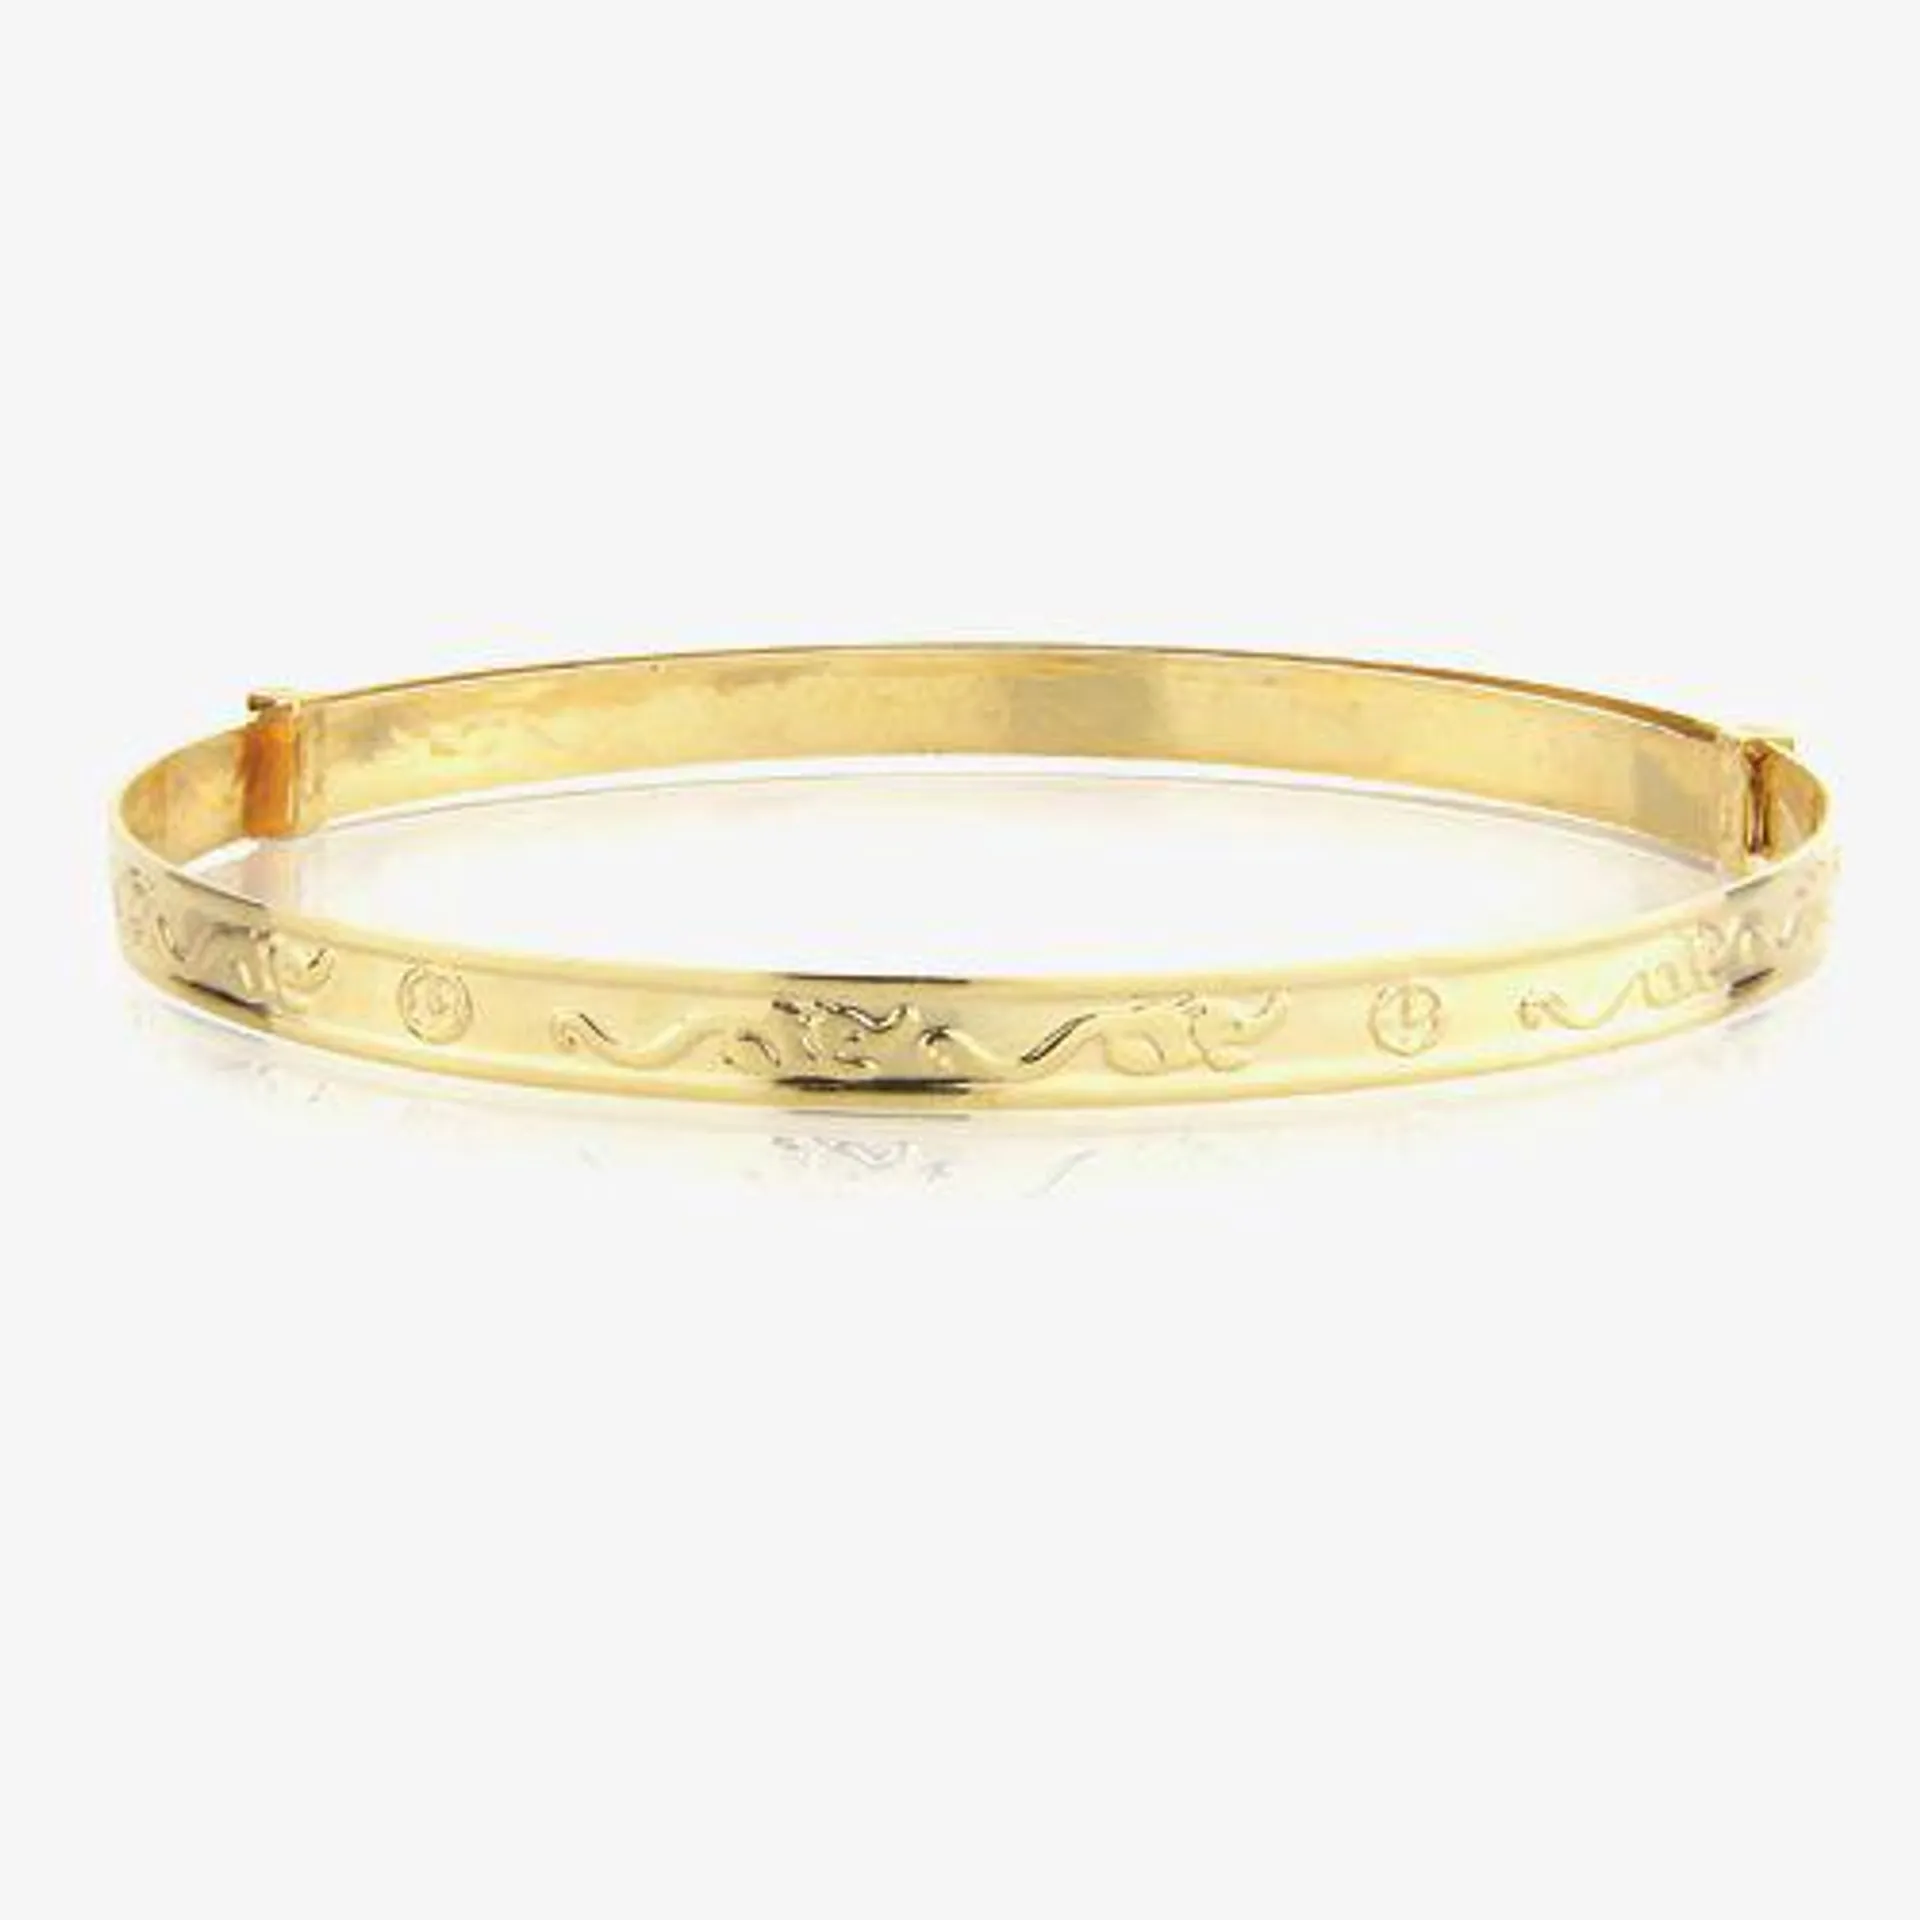 9ct Gold Expandable Patterned Baby Bangle BN310